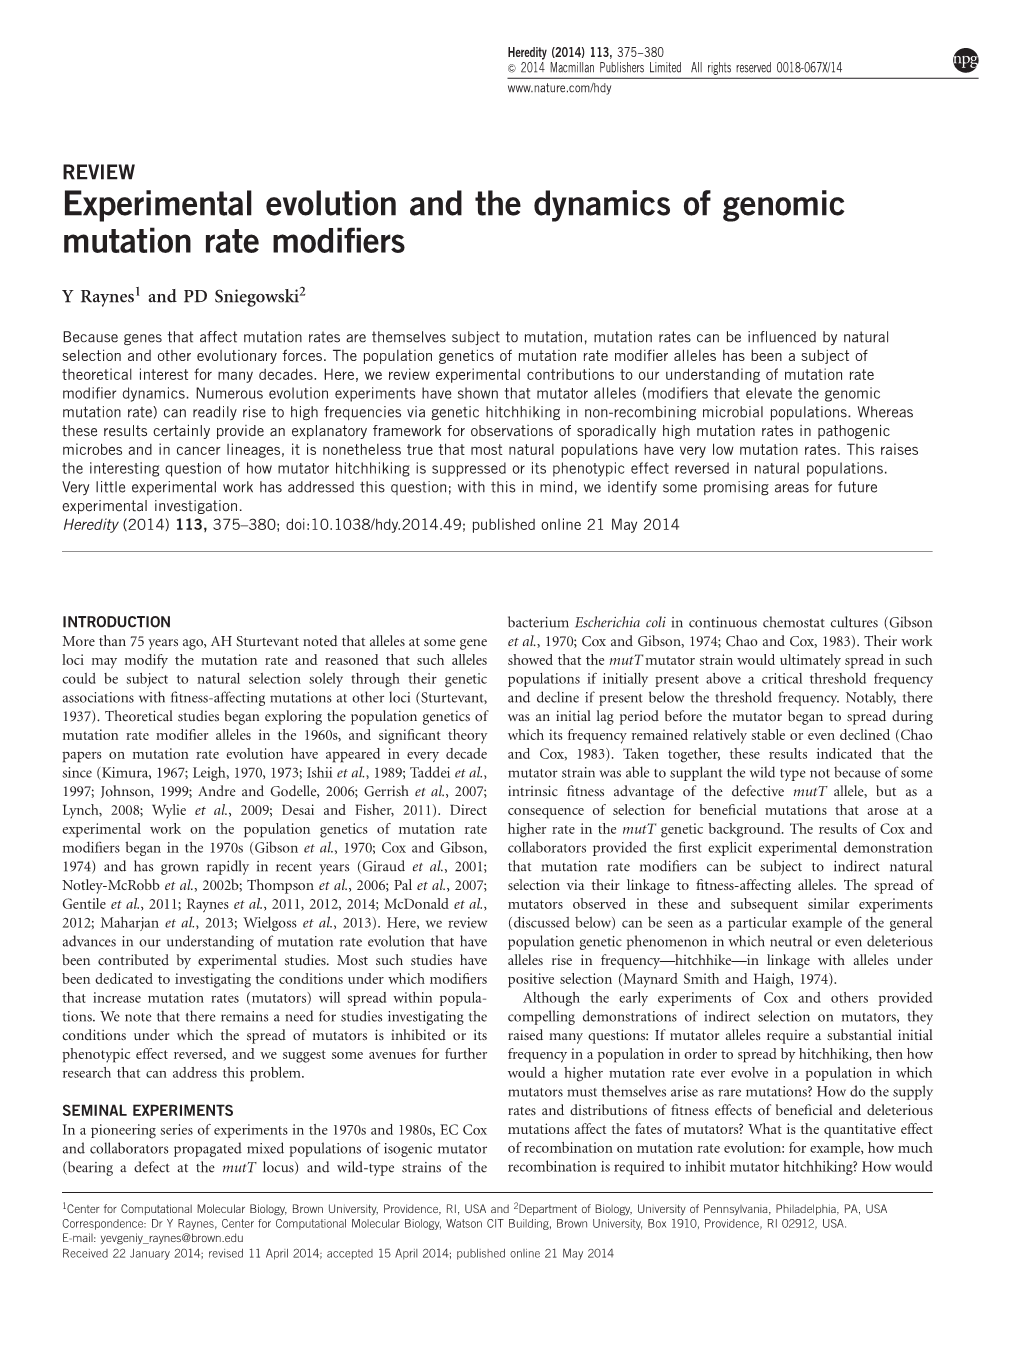 Experimental Evolution and the Dynamics of Genomic Mutation Rate Modiﬁers